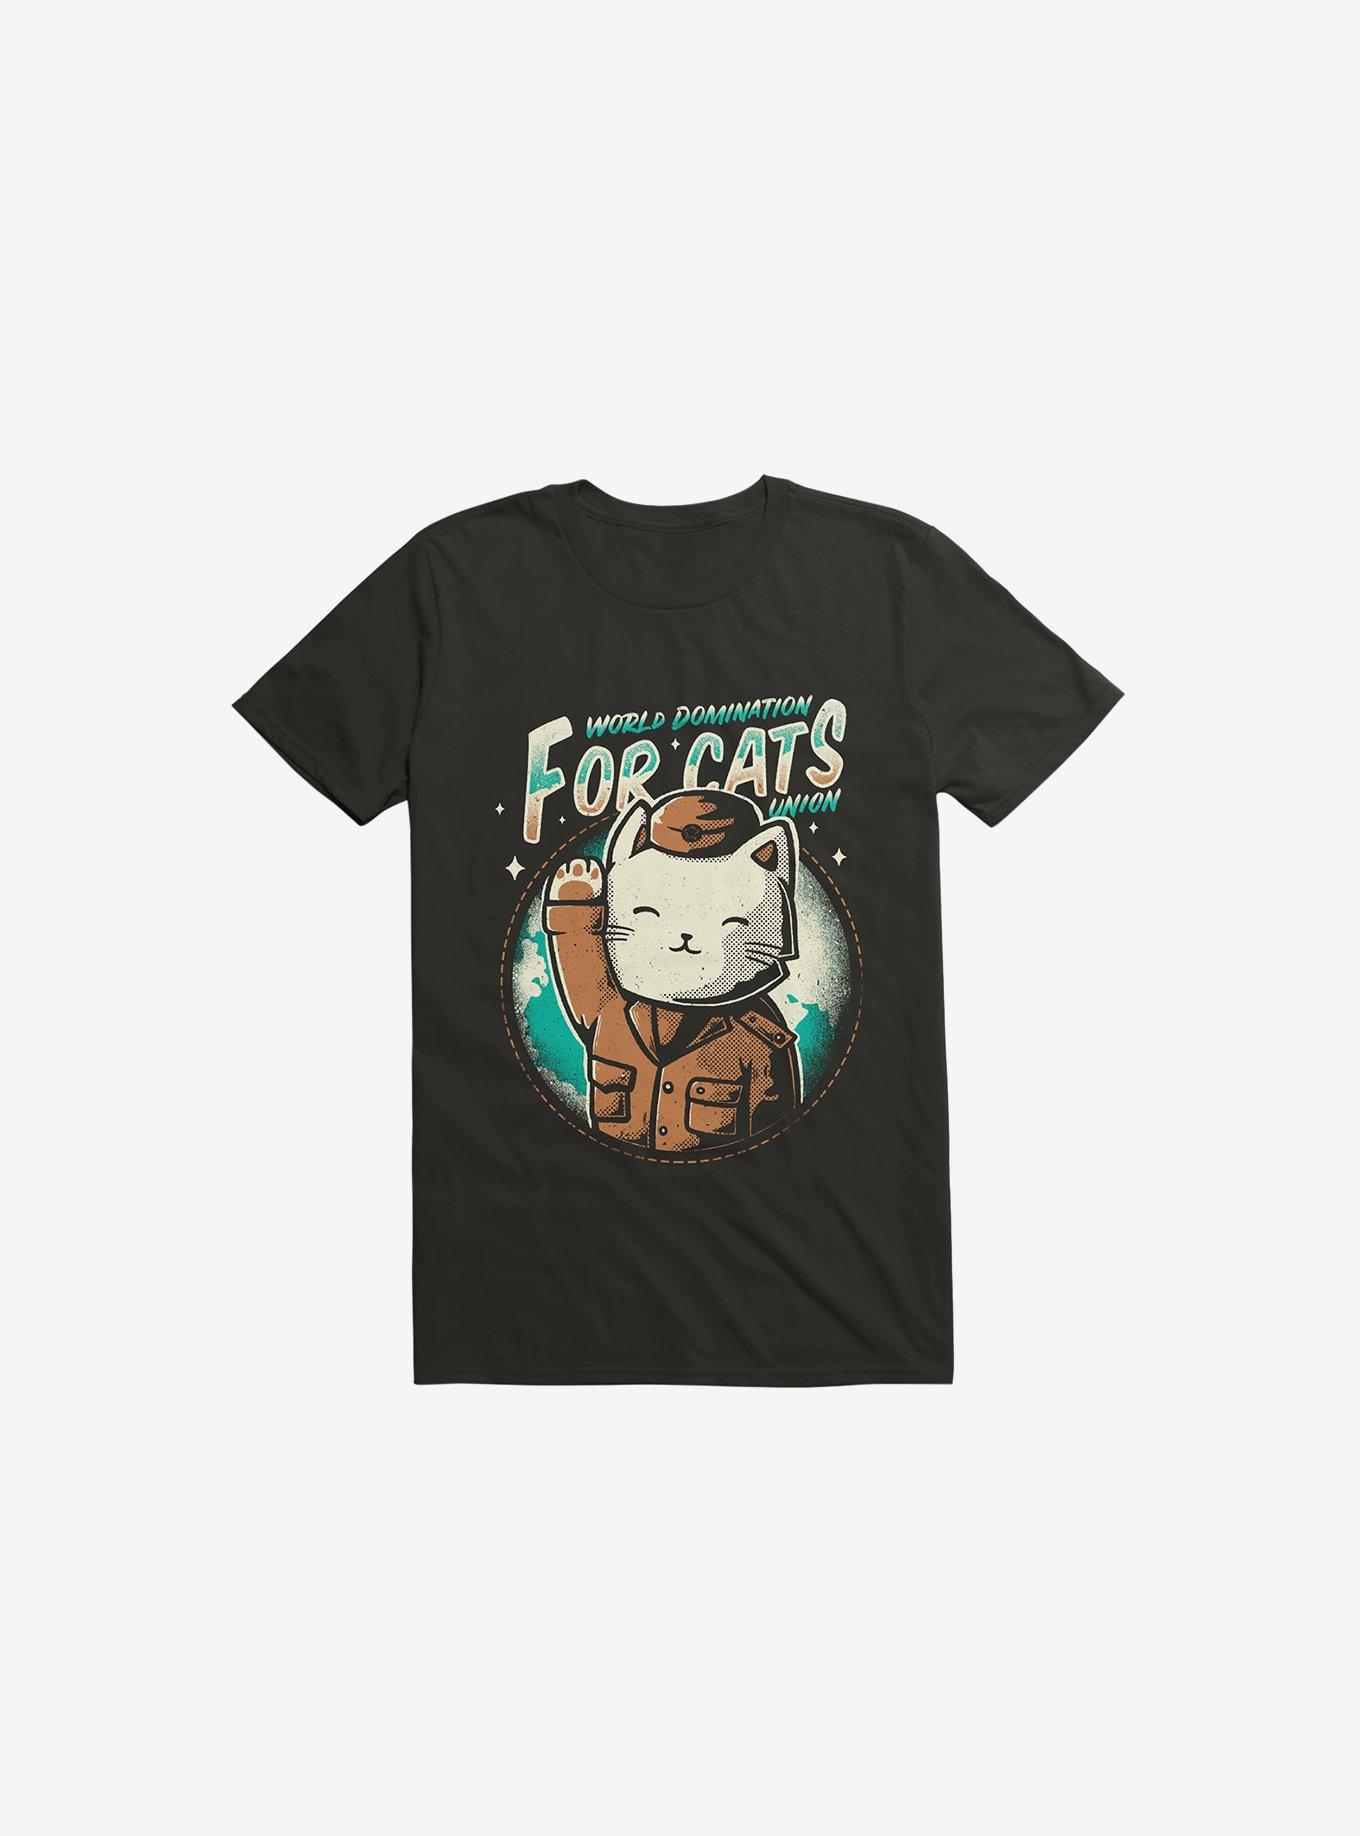 World Domination For Cats Union T-Shirt